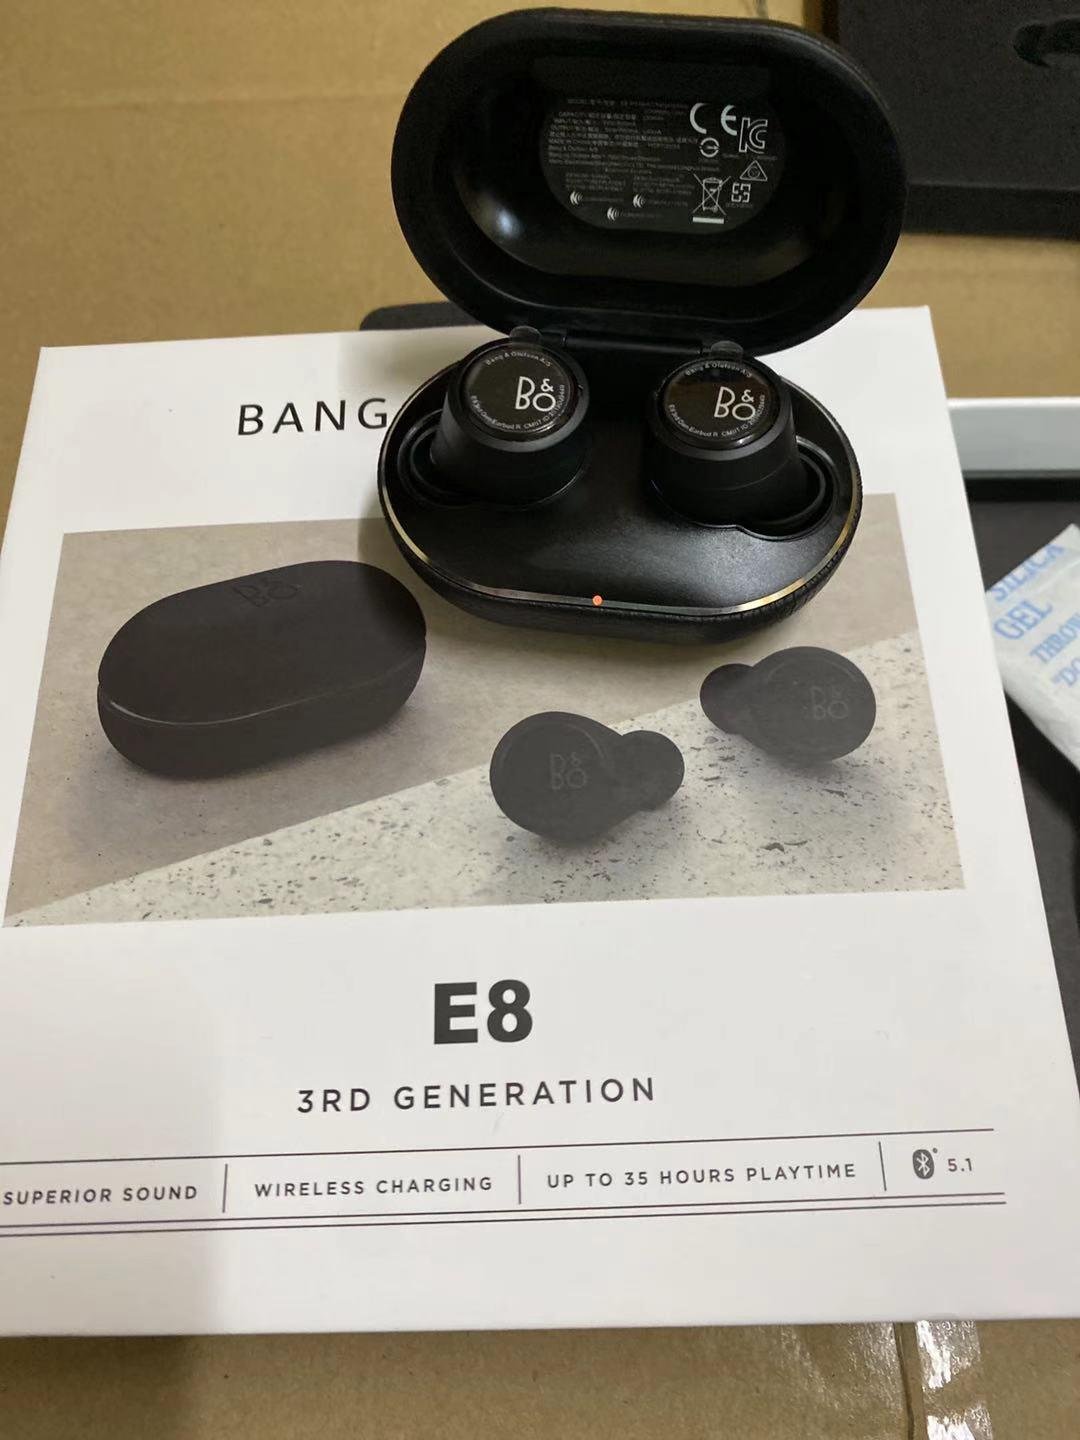 B&O Bang Olufsen Beoplay E8 3rd Generation Ture wireless earbuds - E8 3